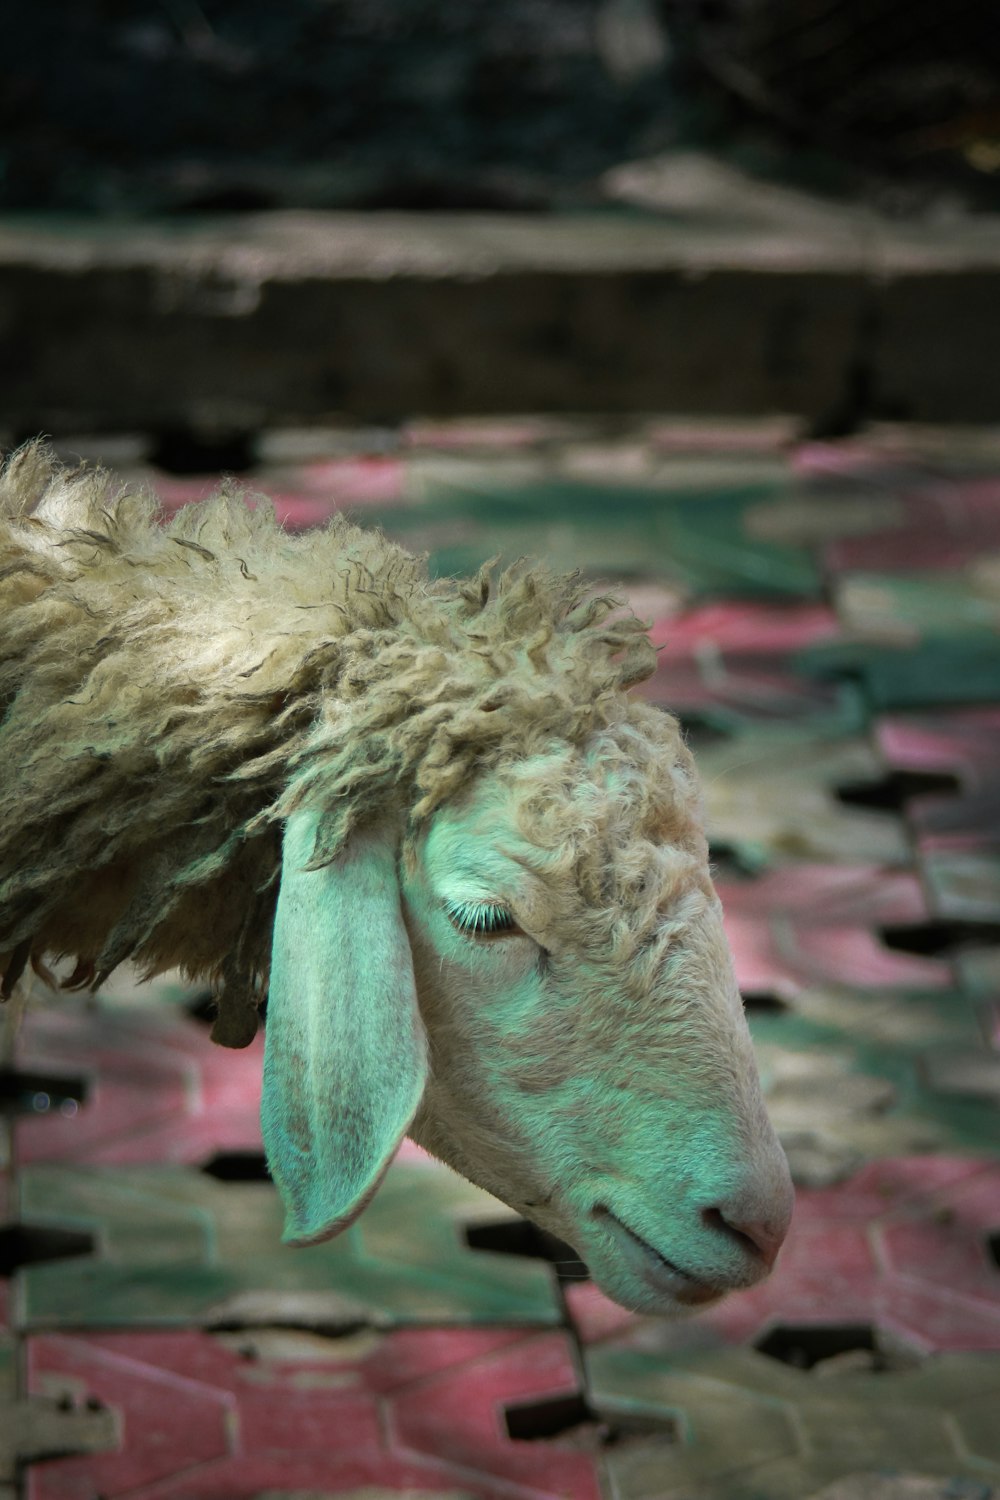 a close up of a sheep on a tiled floor